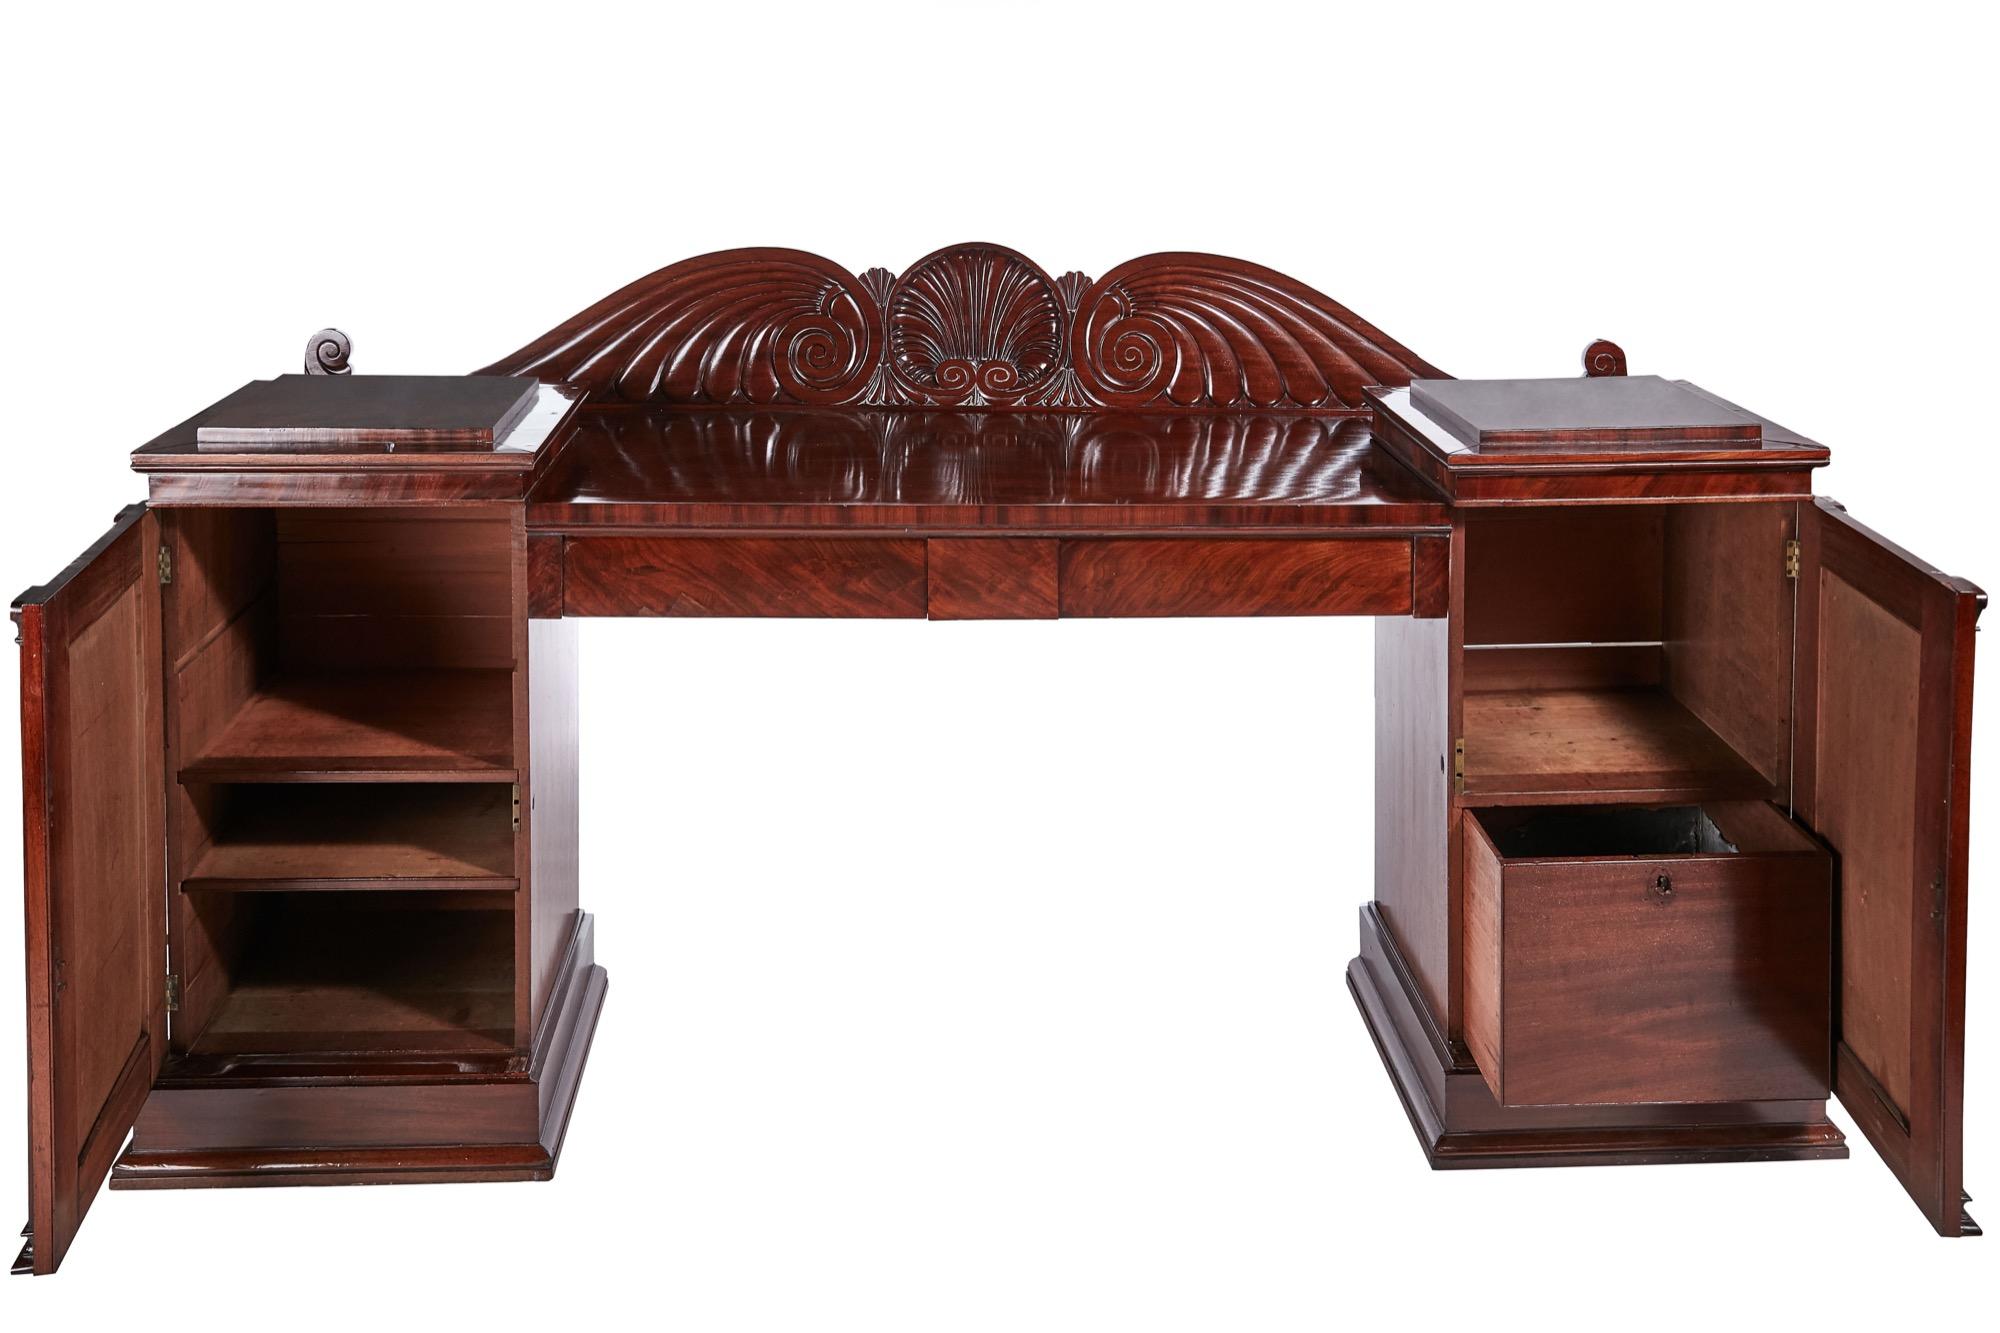 This is an outstanding quality 19th century antique mahogany carved sideboard with an exquisitely carved shaped back and two drawers to the frieze. It is supported by two pedestals with striking flame mahogany doors and a fitted interior. It stands